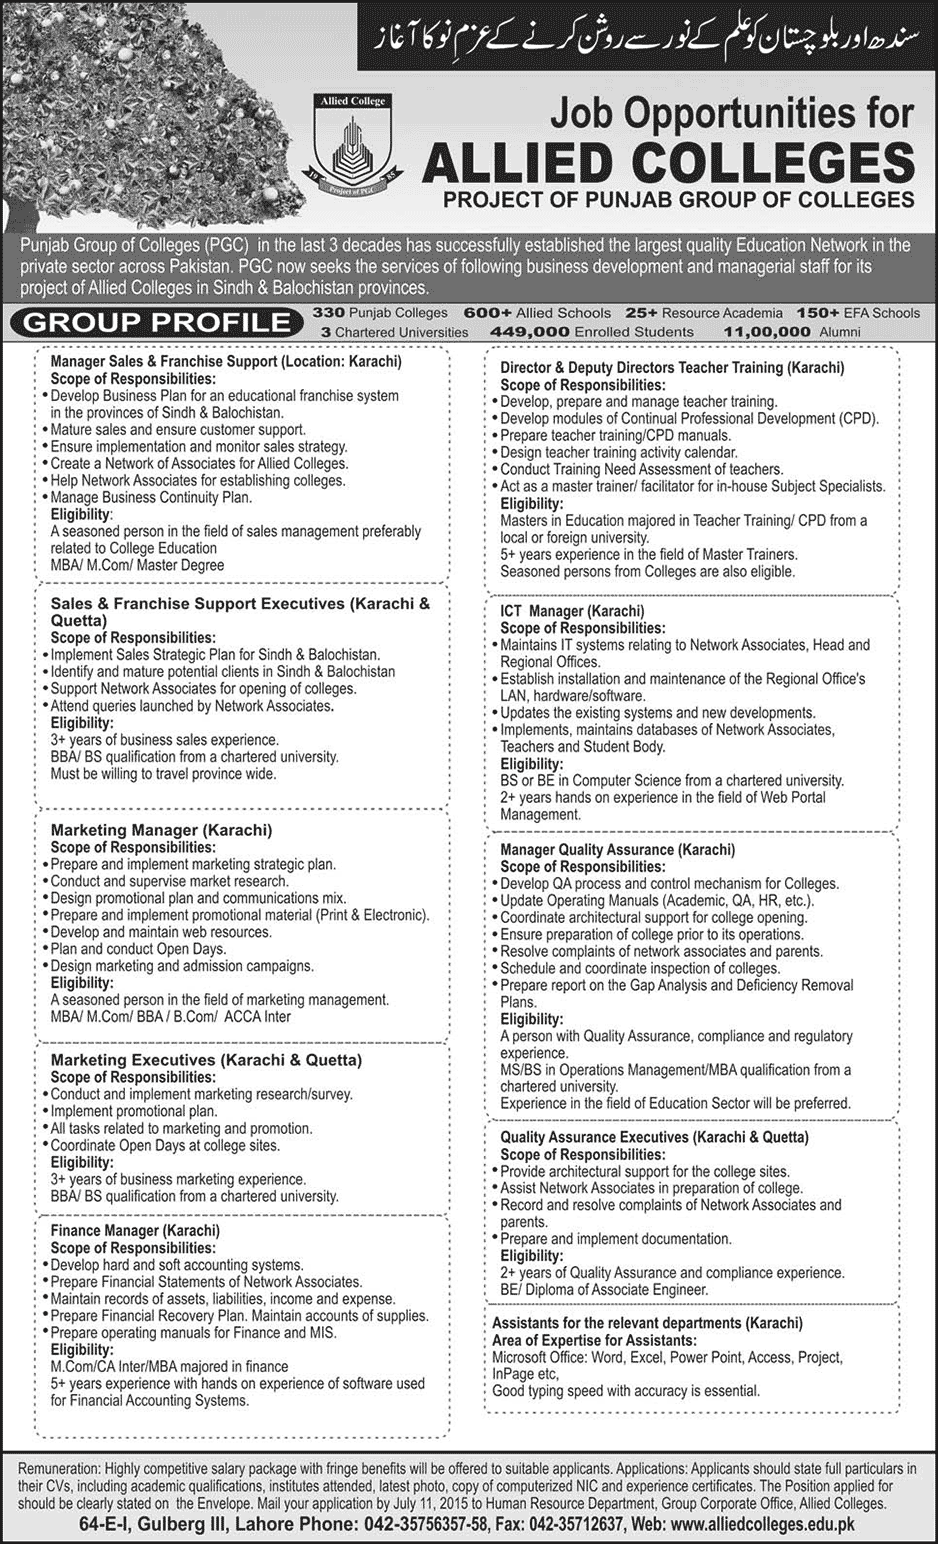 Allied Colleges Karachi / Quetta Jobs 2015 June Punjab Group of Colleges / Schools Latest